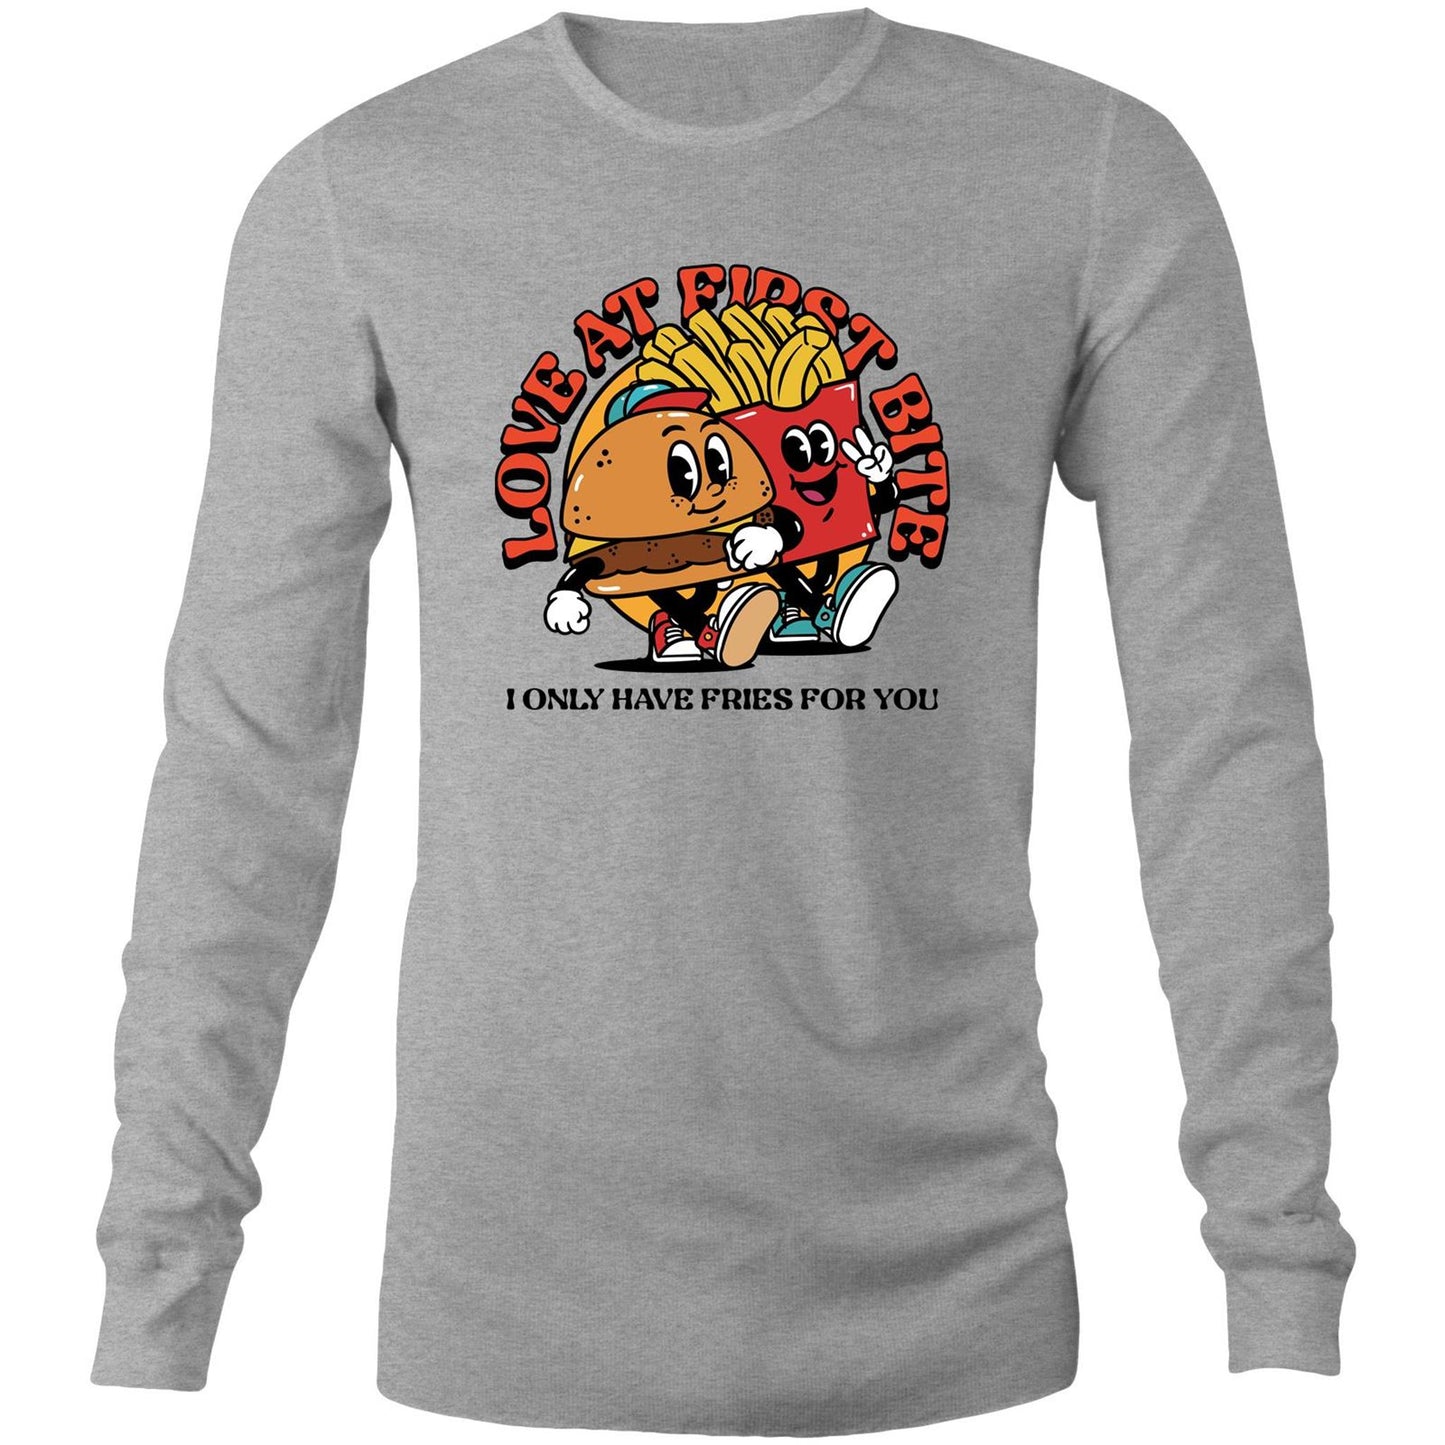 Love At First Bite, Burger And Fries - Long Sleeve T-Shirt Grey Marle Unisex Long Sleeve T-shirt Food